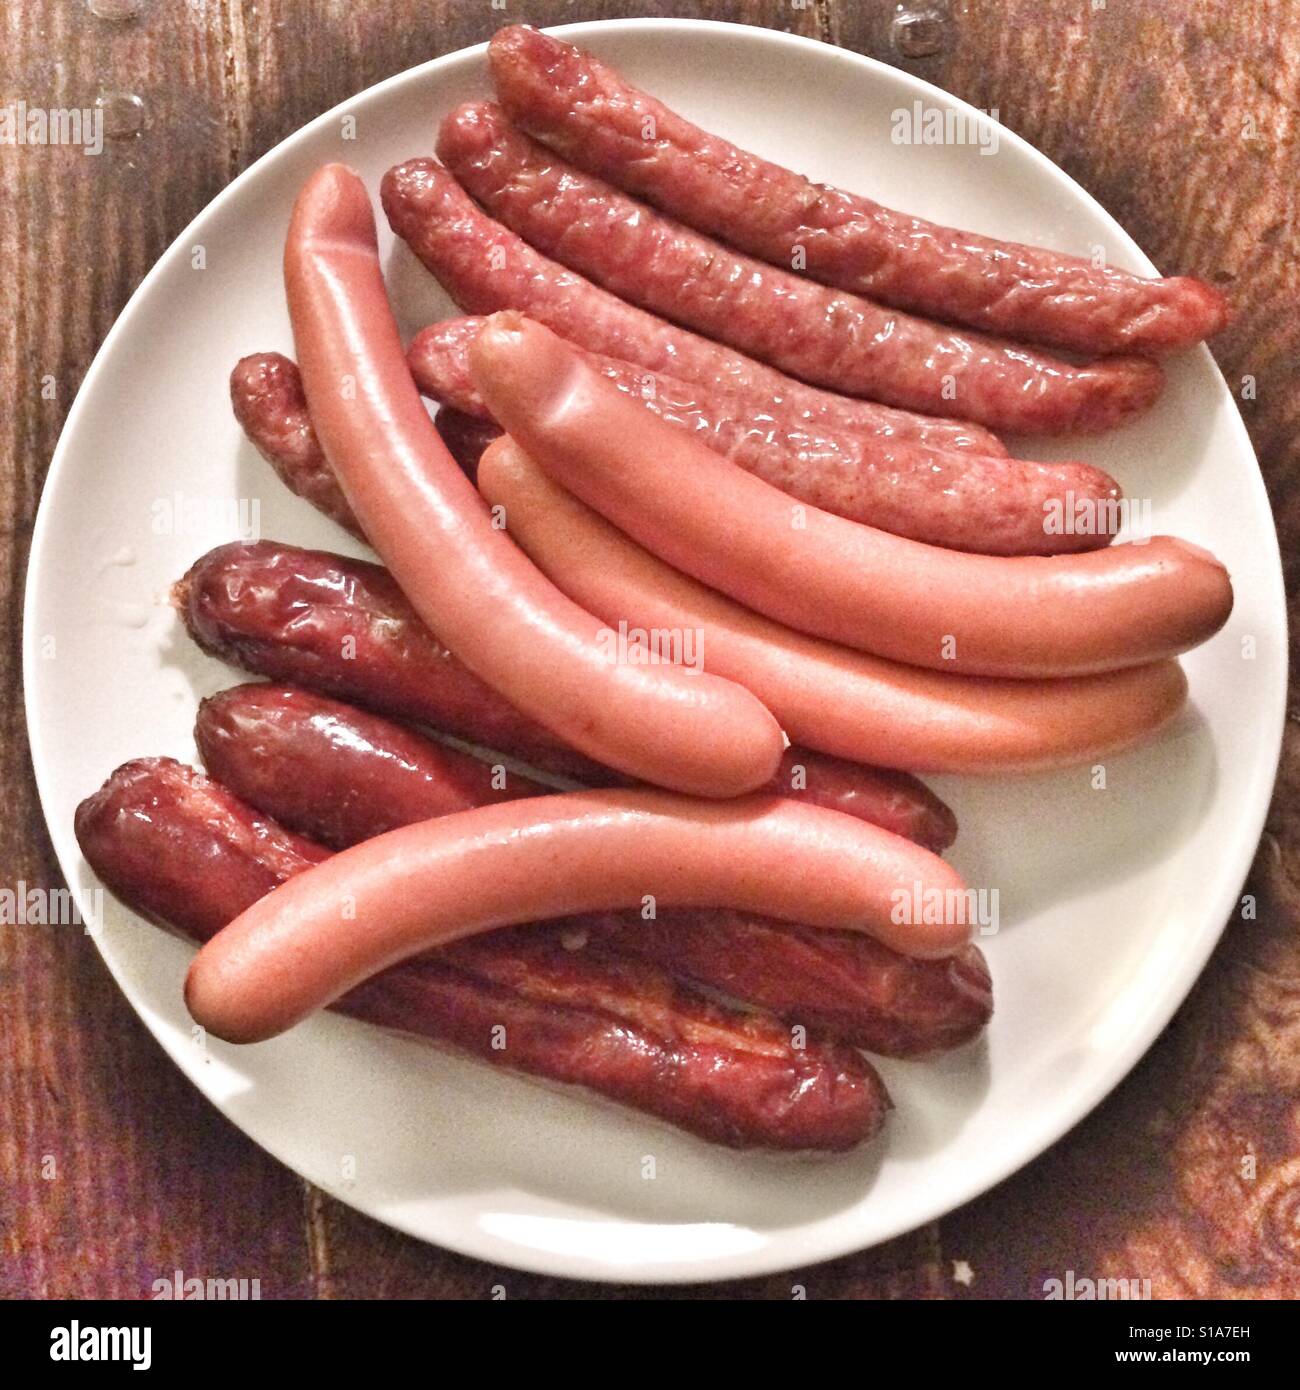 Plate of Austrian sausages Stock Photo